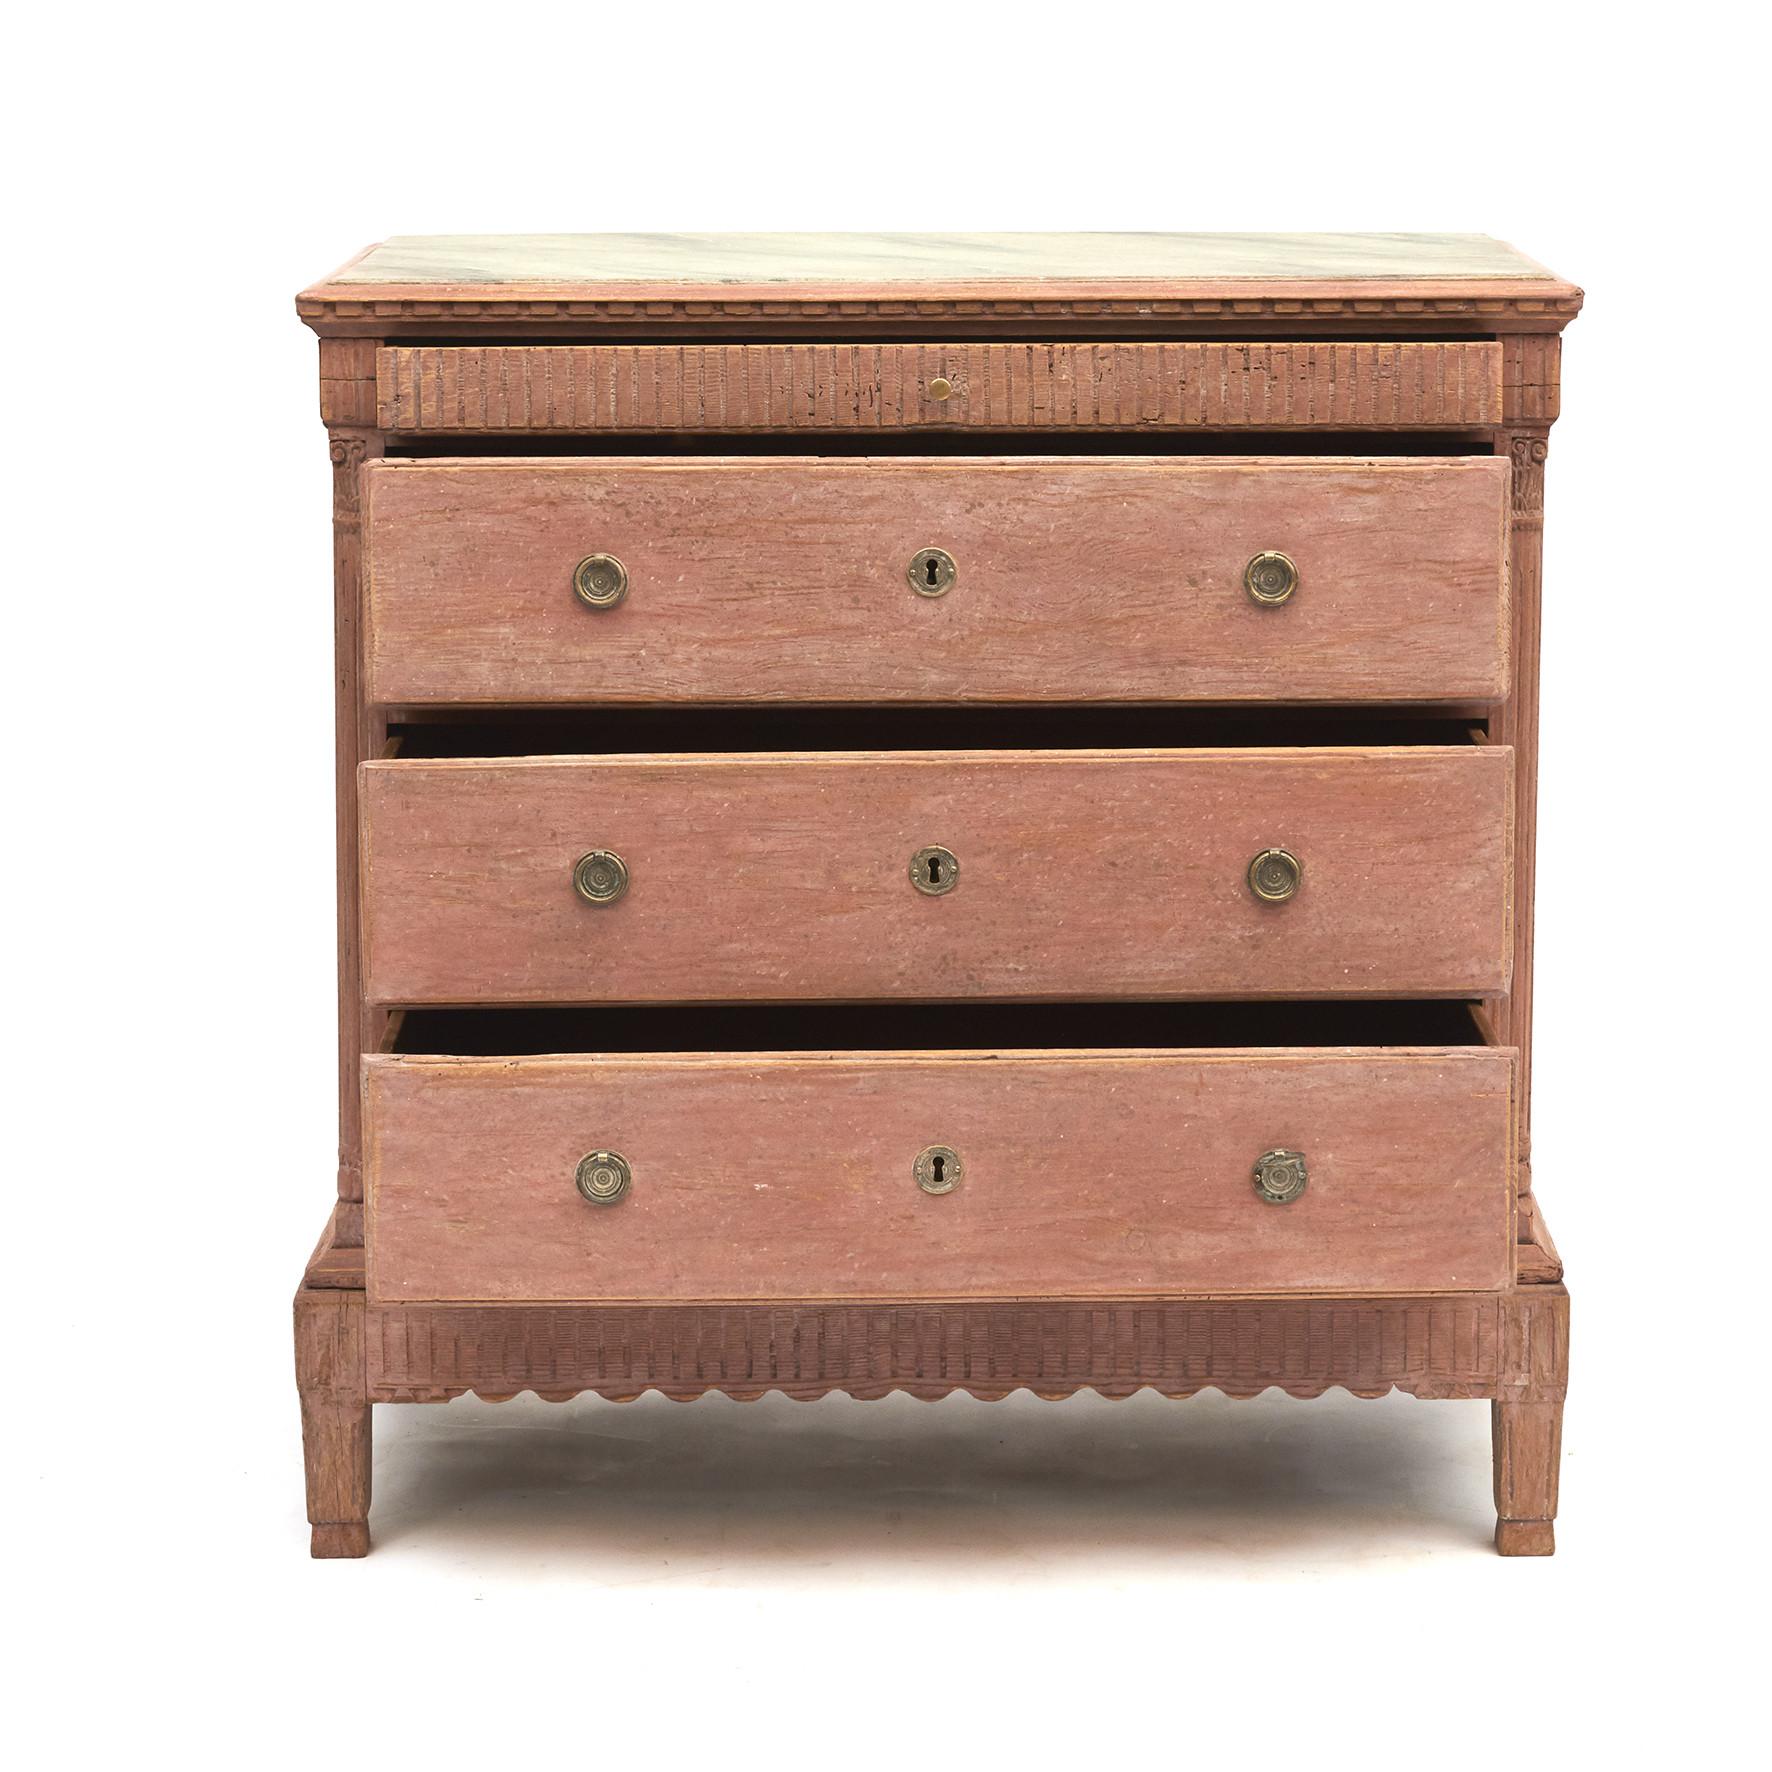 Danish Louis XVI three-drawer commode in light Pompeii red and with a grey faux marble-top.
Carved dental molding frieze above an arrangement of three larger drawers, top drawer with flutings, flanked by fluted columns corners with carved